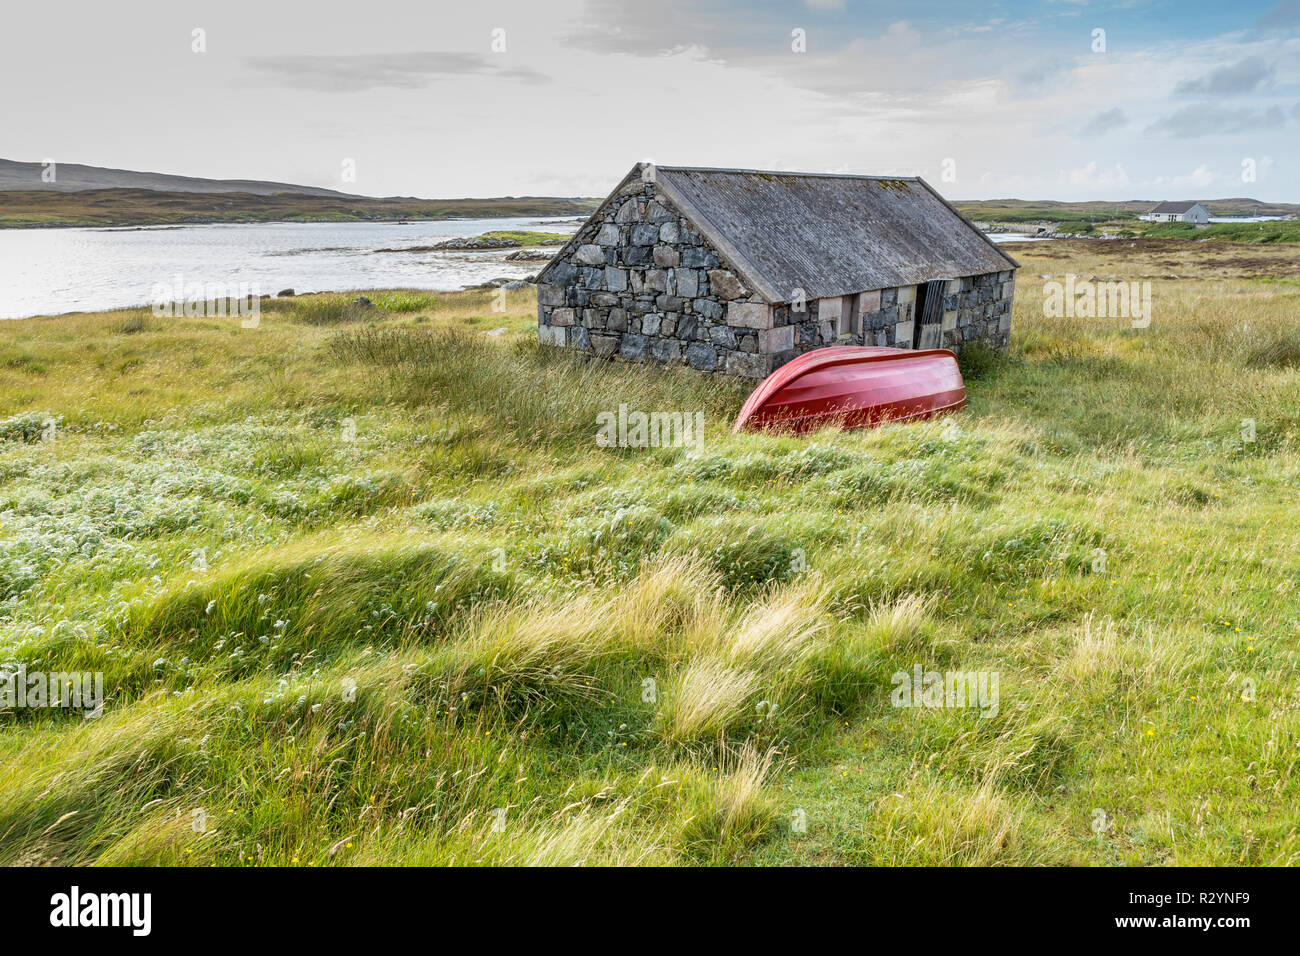 Traditional stone cottage and red rowing boat by the coast, Uist, Outer Hebrides, Scotland, UK, Europe Stock Photo